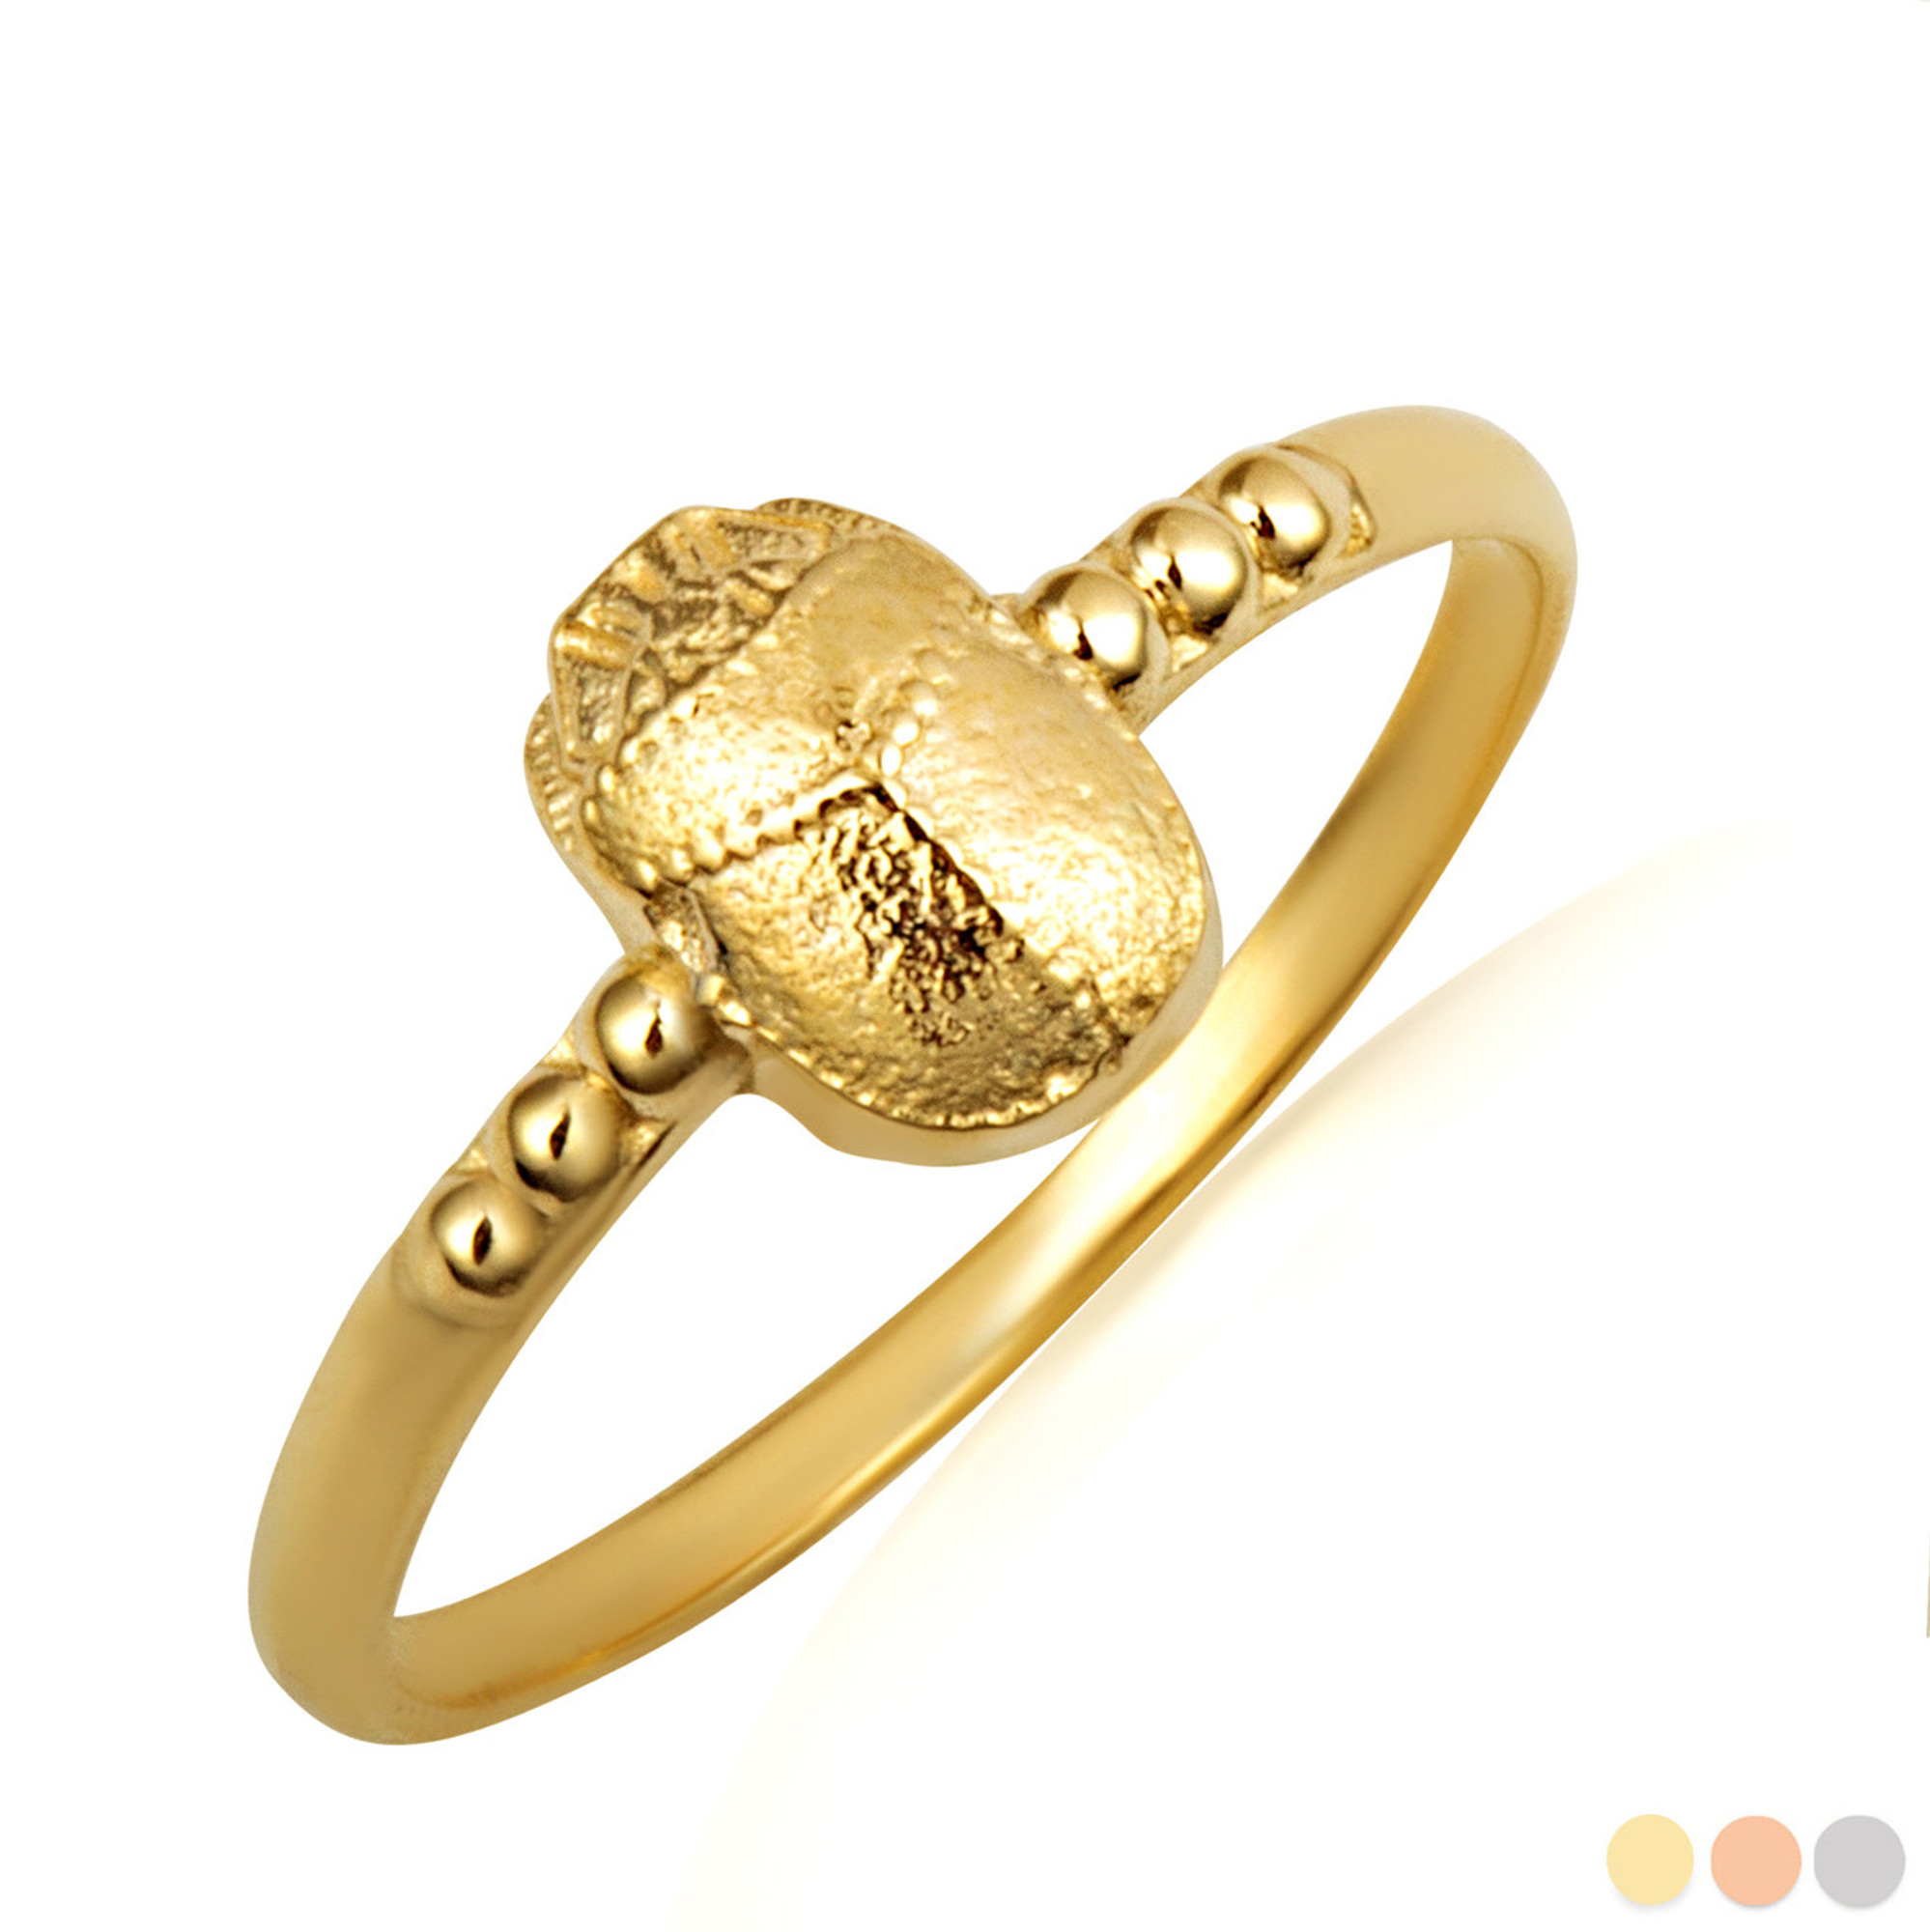 Scarab Beetle Ring in Silver & Gold Variants | Mercurious Designs